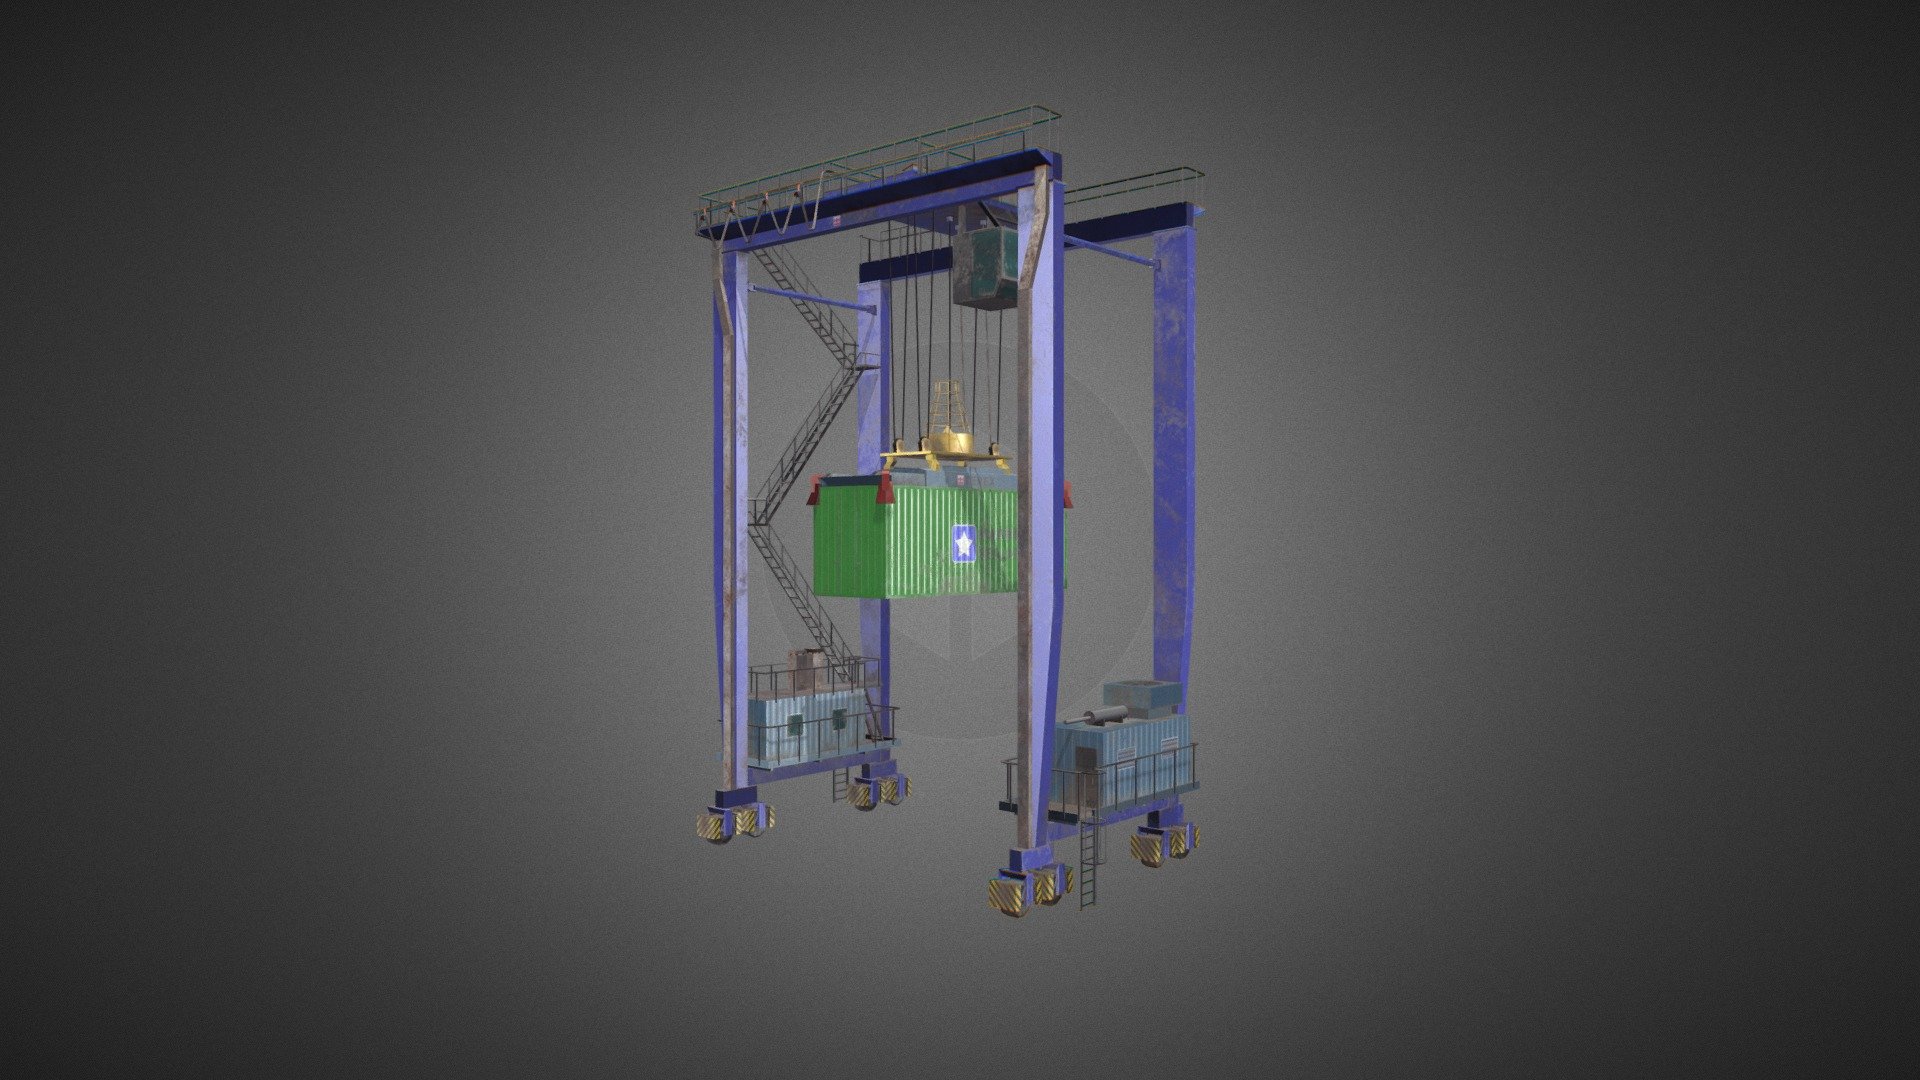 Low poly game-ready 3d model of a Rubber tyred gantry crane - Rubber tyred gantry crane - Buy Royalty Free 3D model by CG Duck (@cg_duck) 3d model